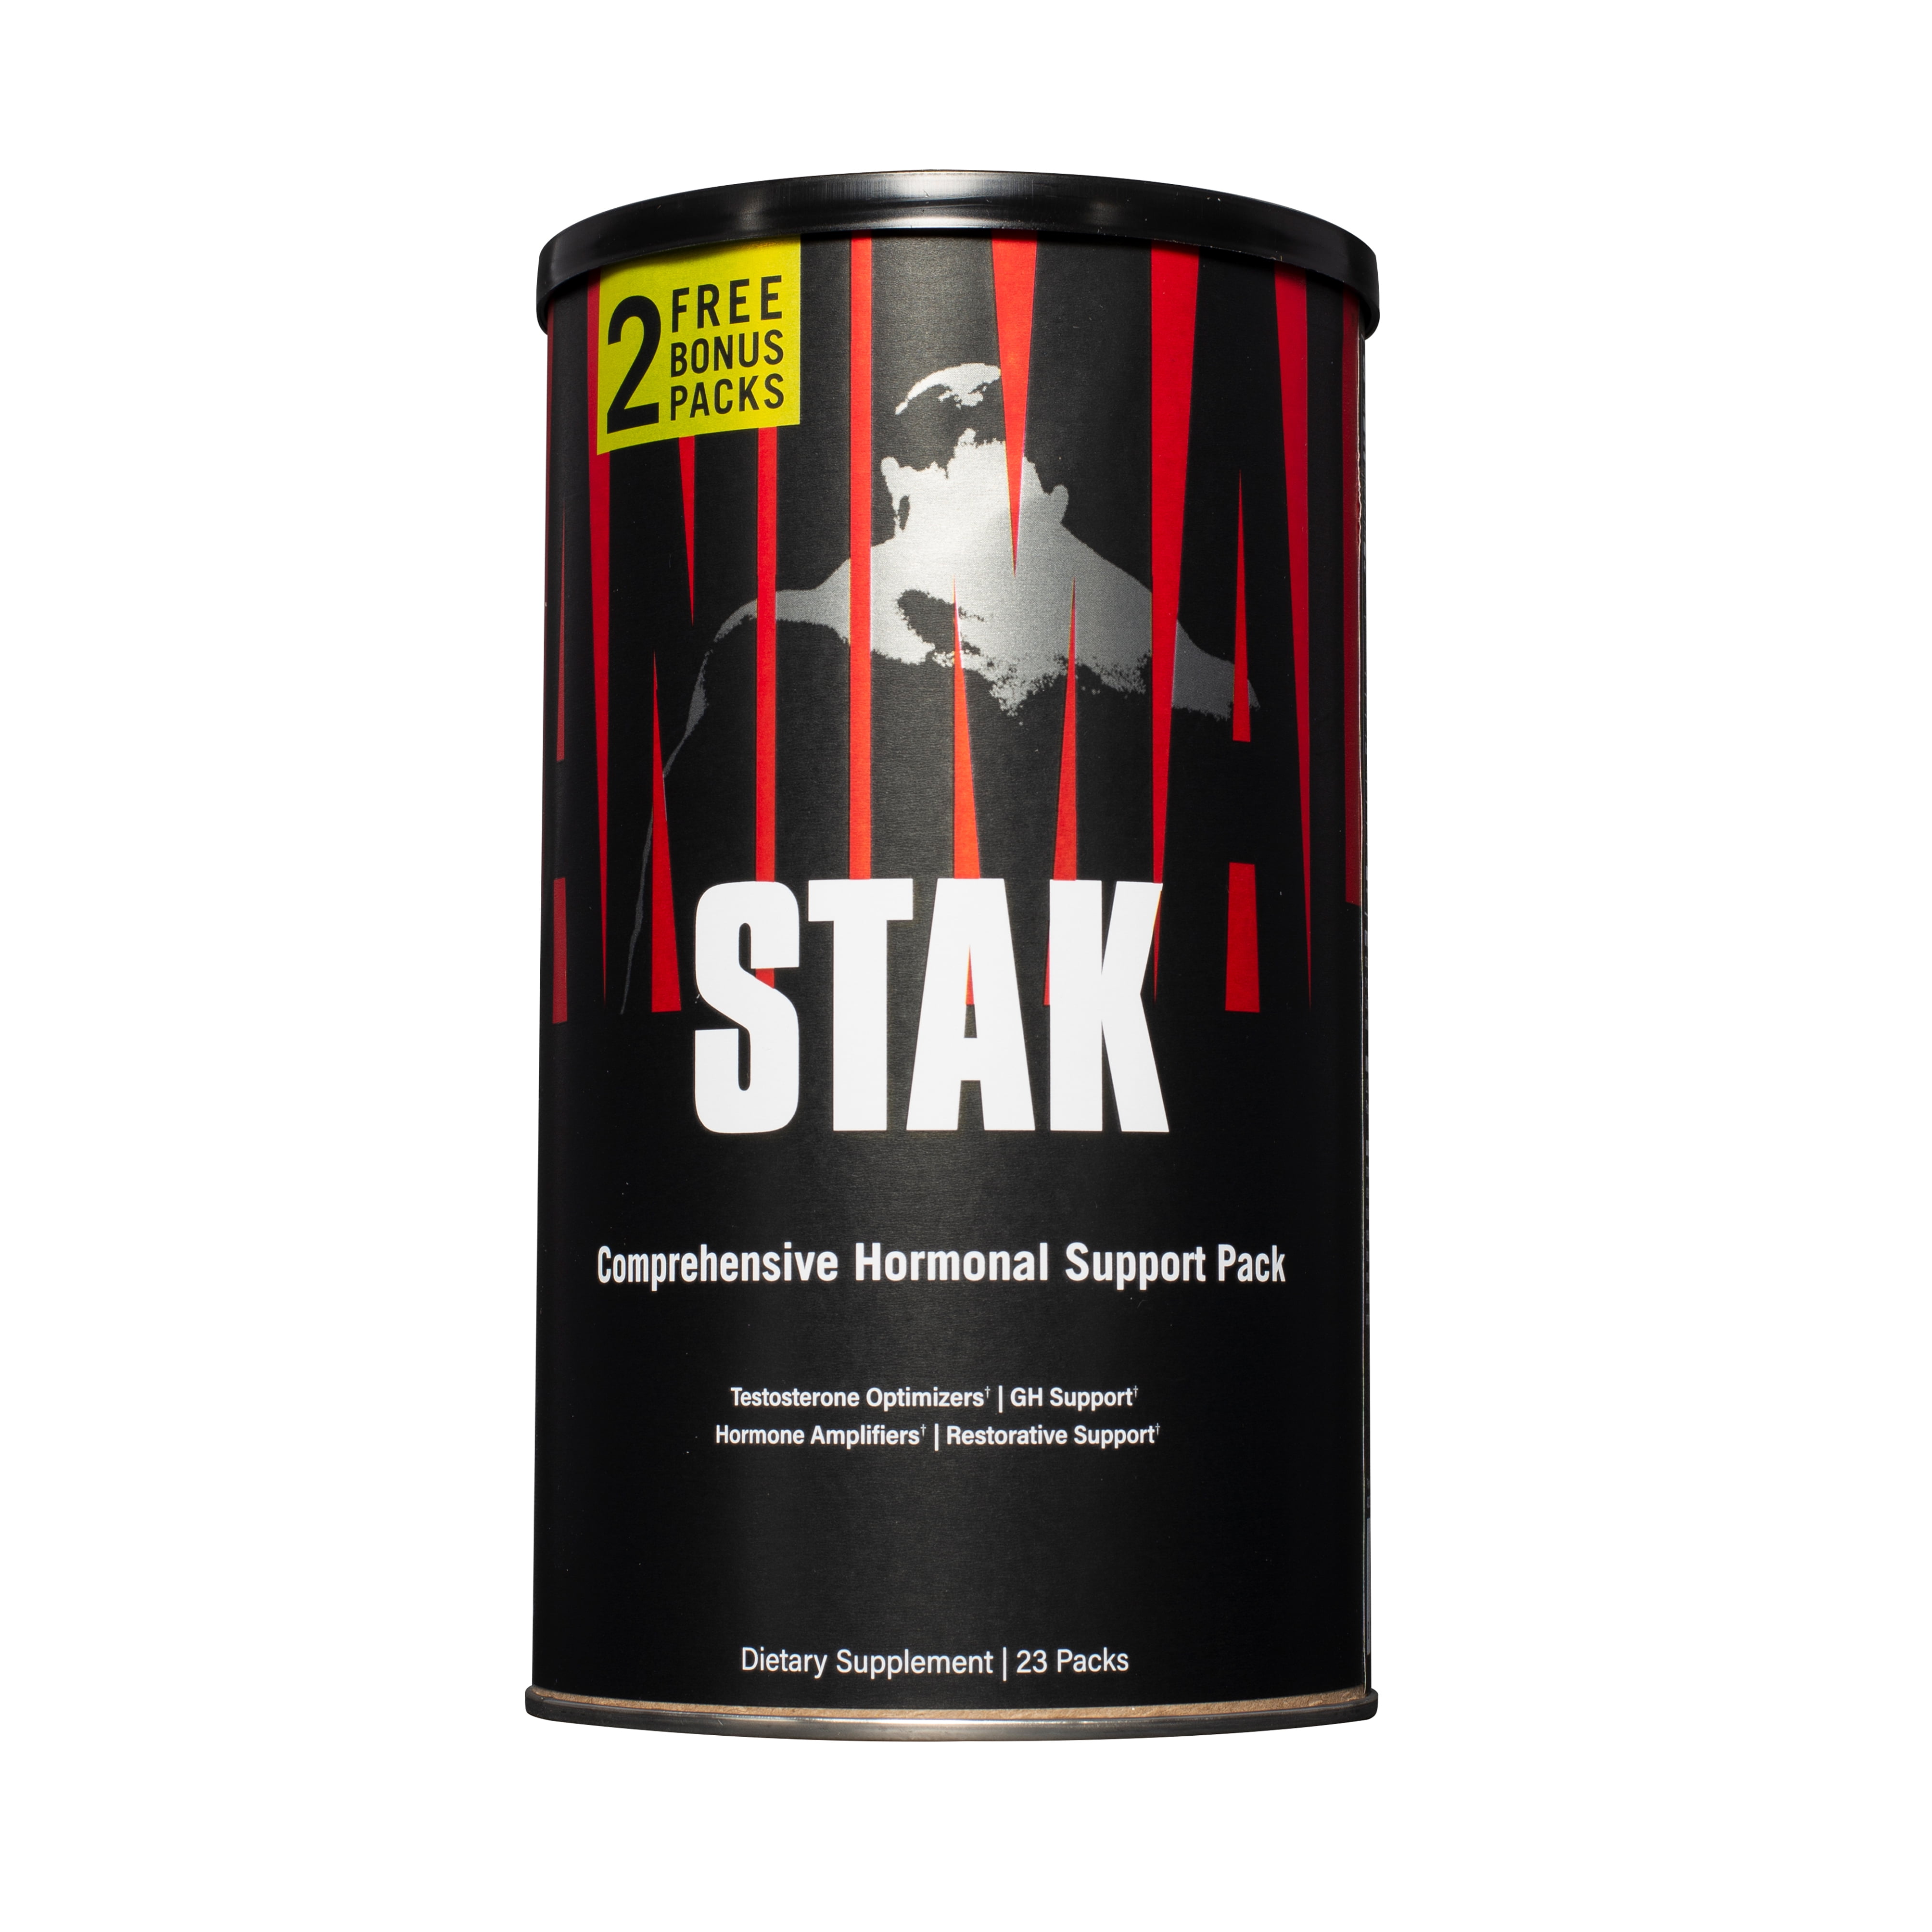 Animal Stak, Natural Hormone Booster For Strength Athletes, 21 Packs - 1  Month Cycle 